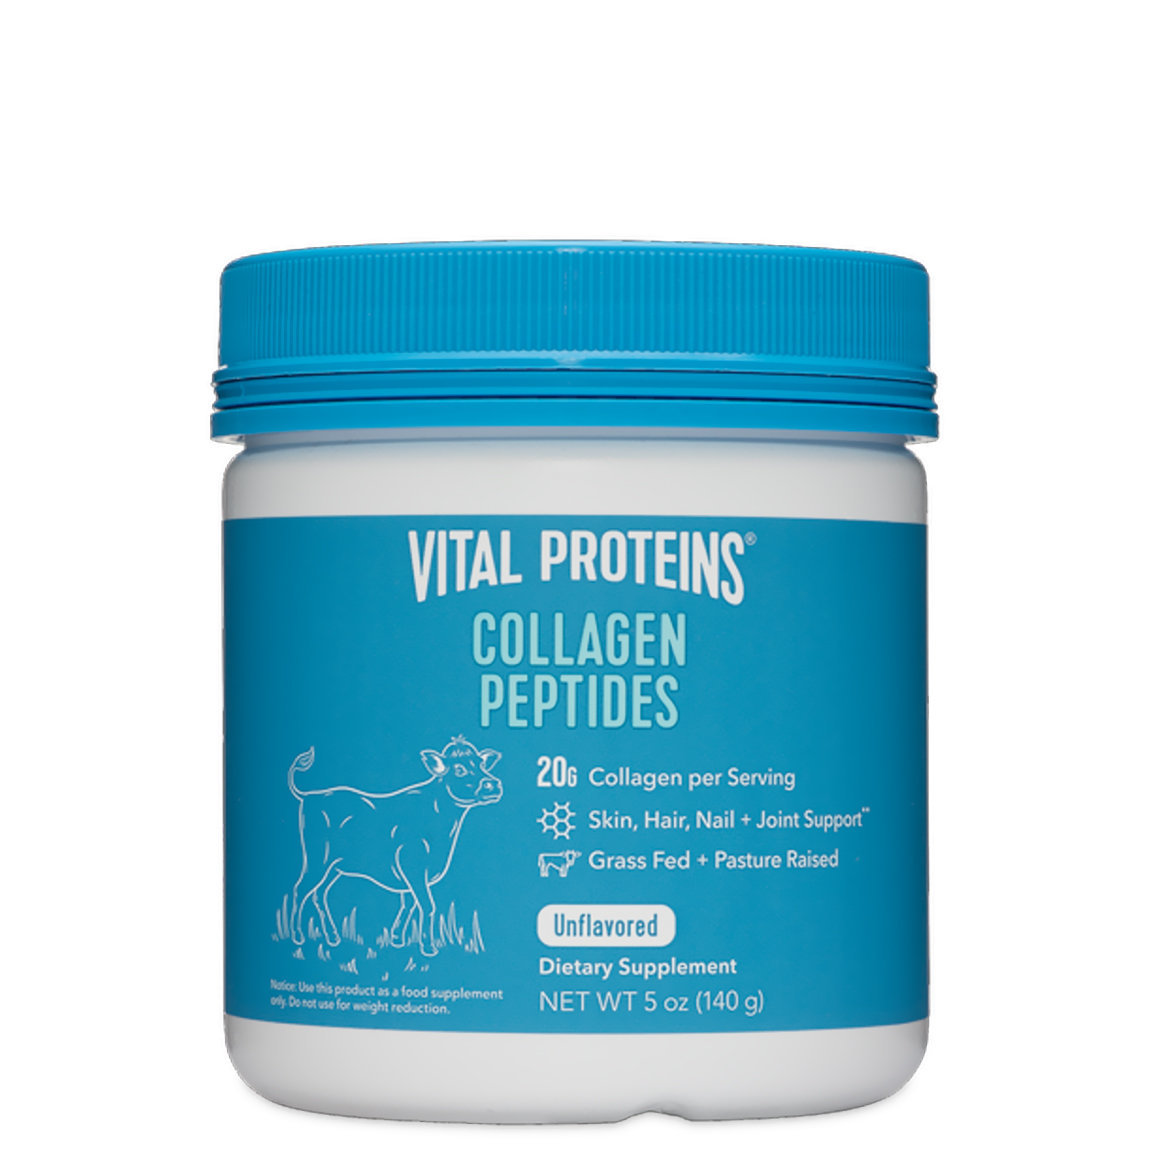 Vital Proteins Collagen Peptides 5 oz Limited Edition alternative view 1 - product swatch.